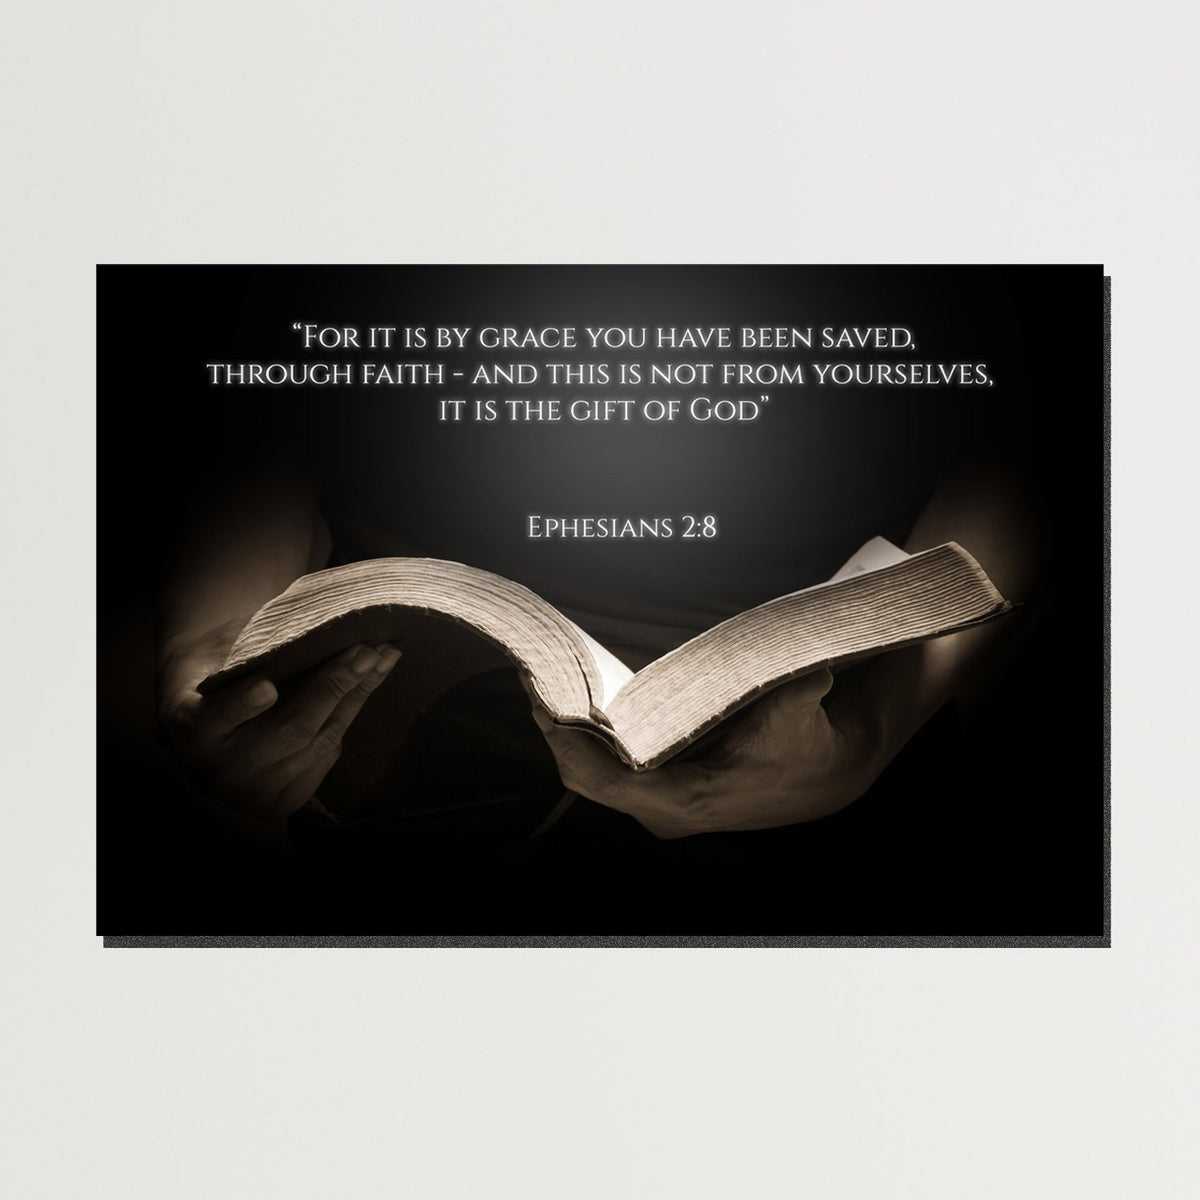 https://cdn.shopify.com/s/files/1/0387/9986/8044/products/BiblequoteEphesians2_8CanvasArtprintStretched-Plain.jpg